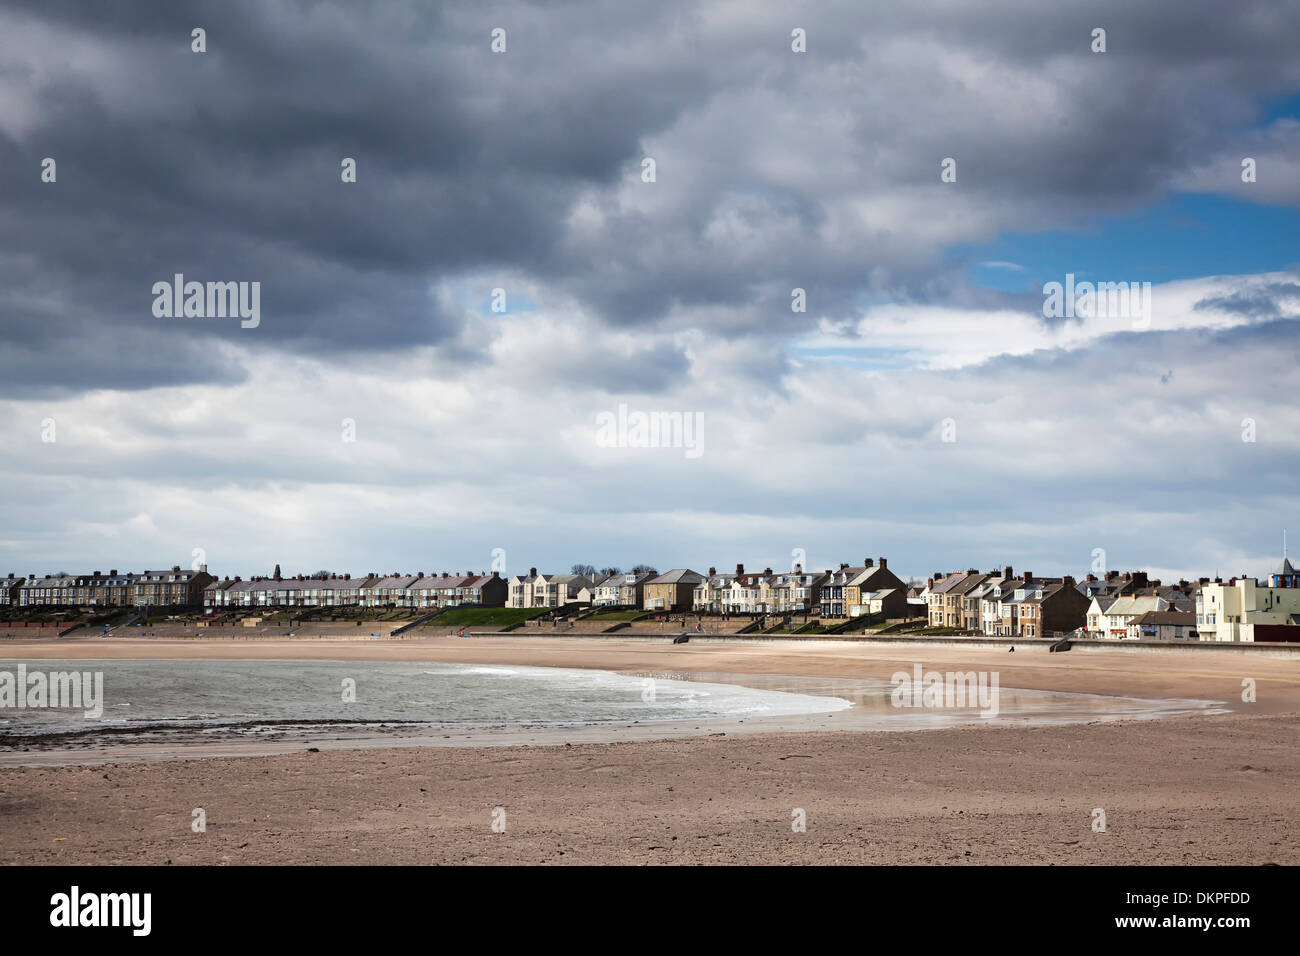 Clouds forming over coastal village Stock Photo